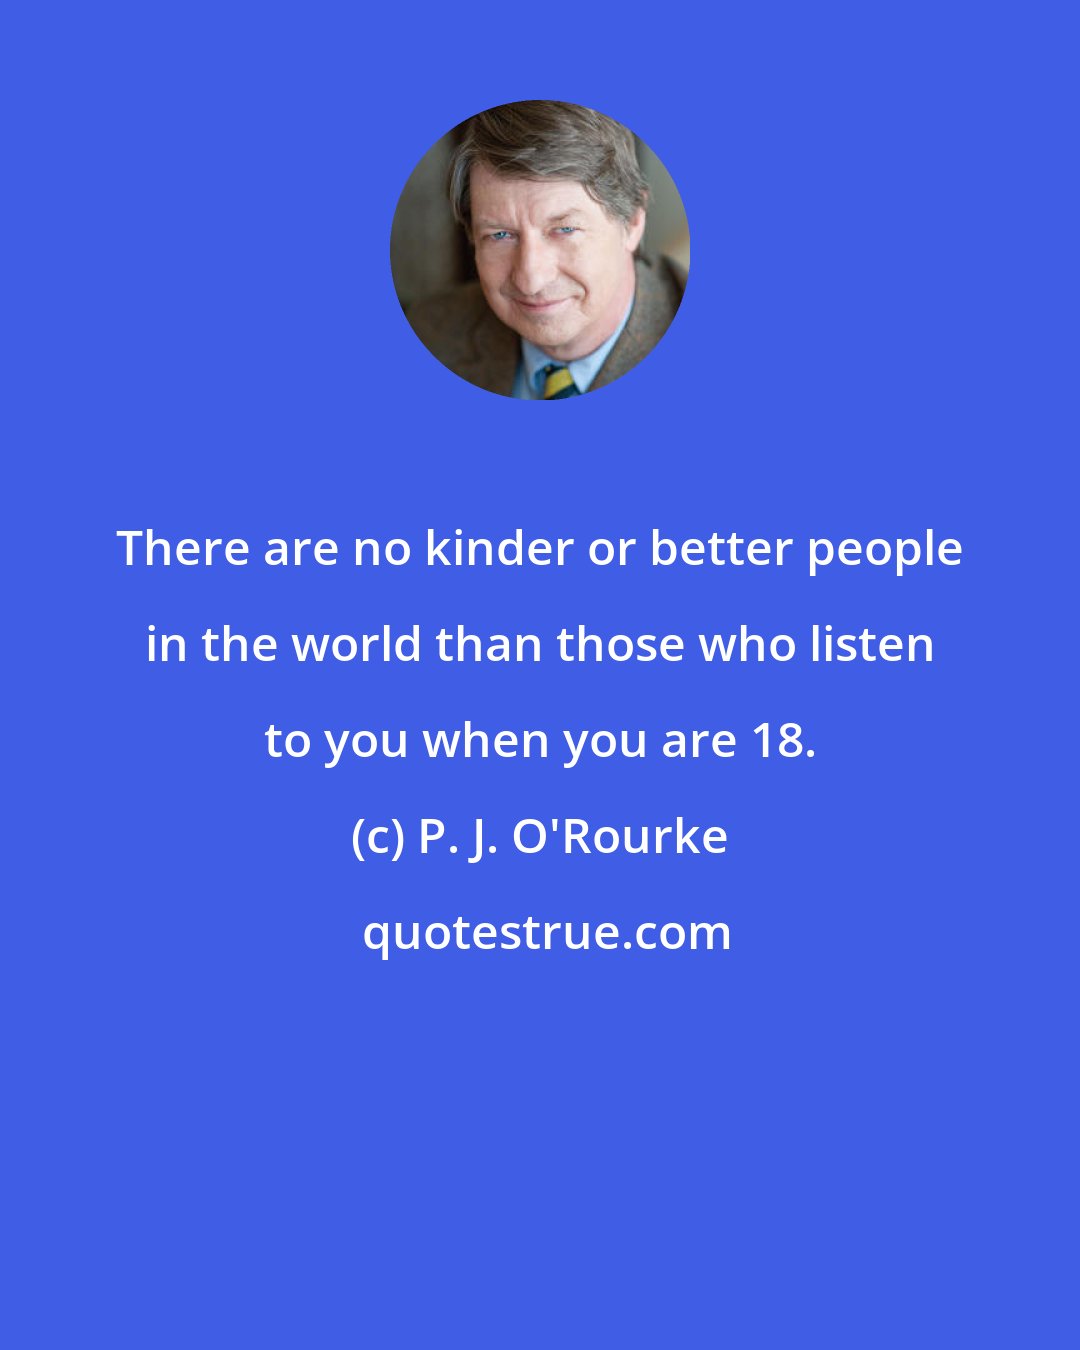 P. J. O'Rourke: There are no kinder or better people in the world than those who listen to you when you are 18.